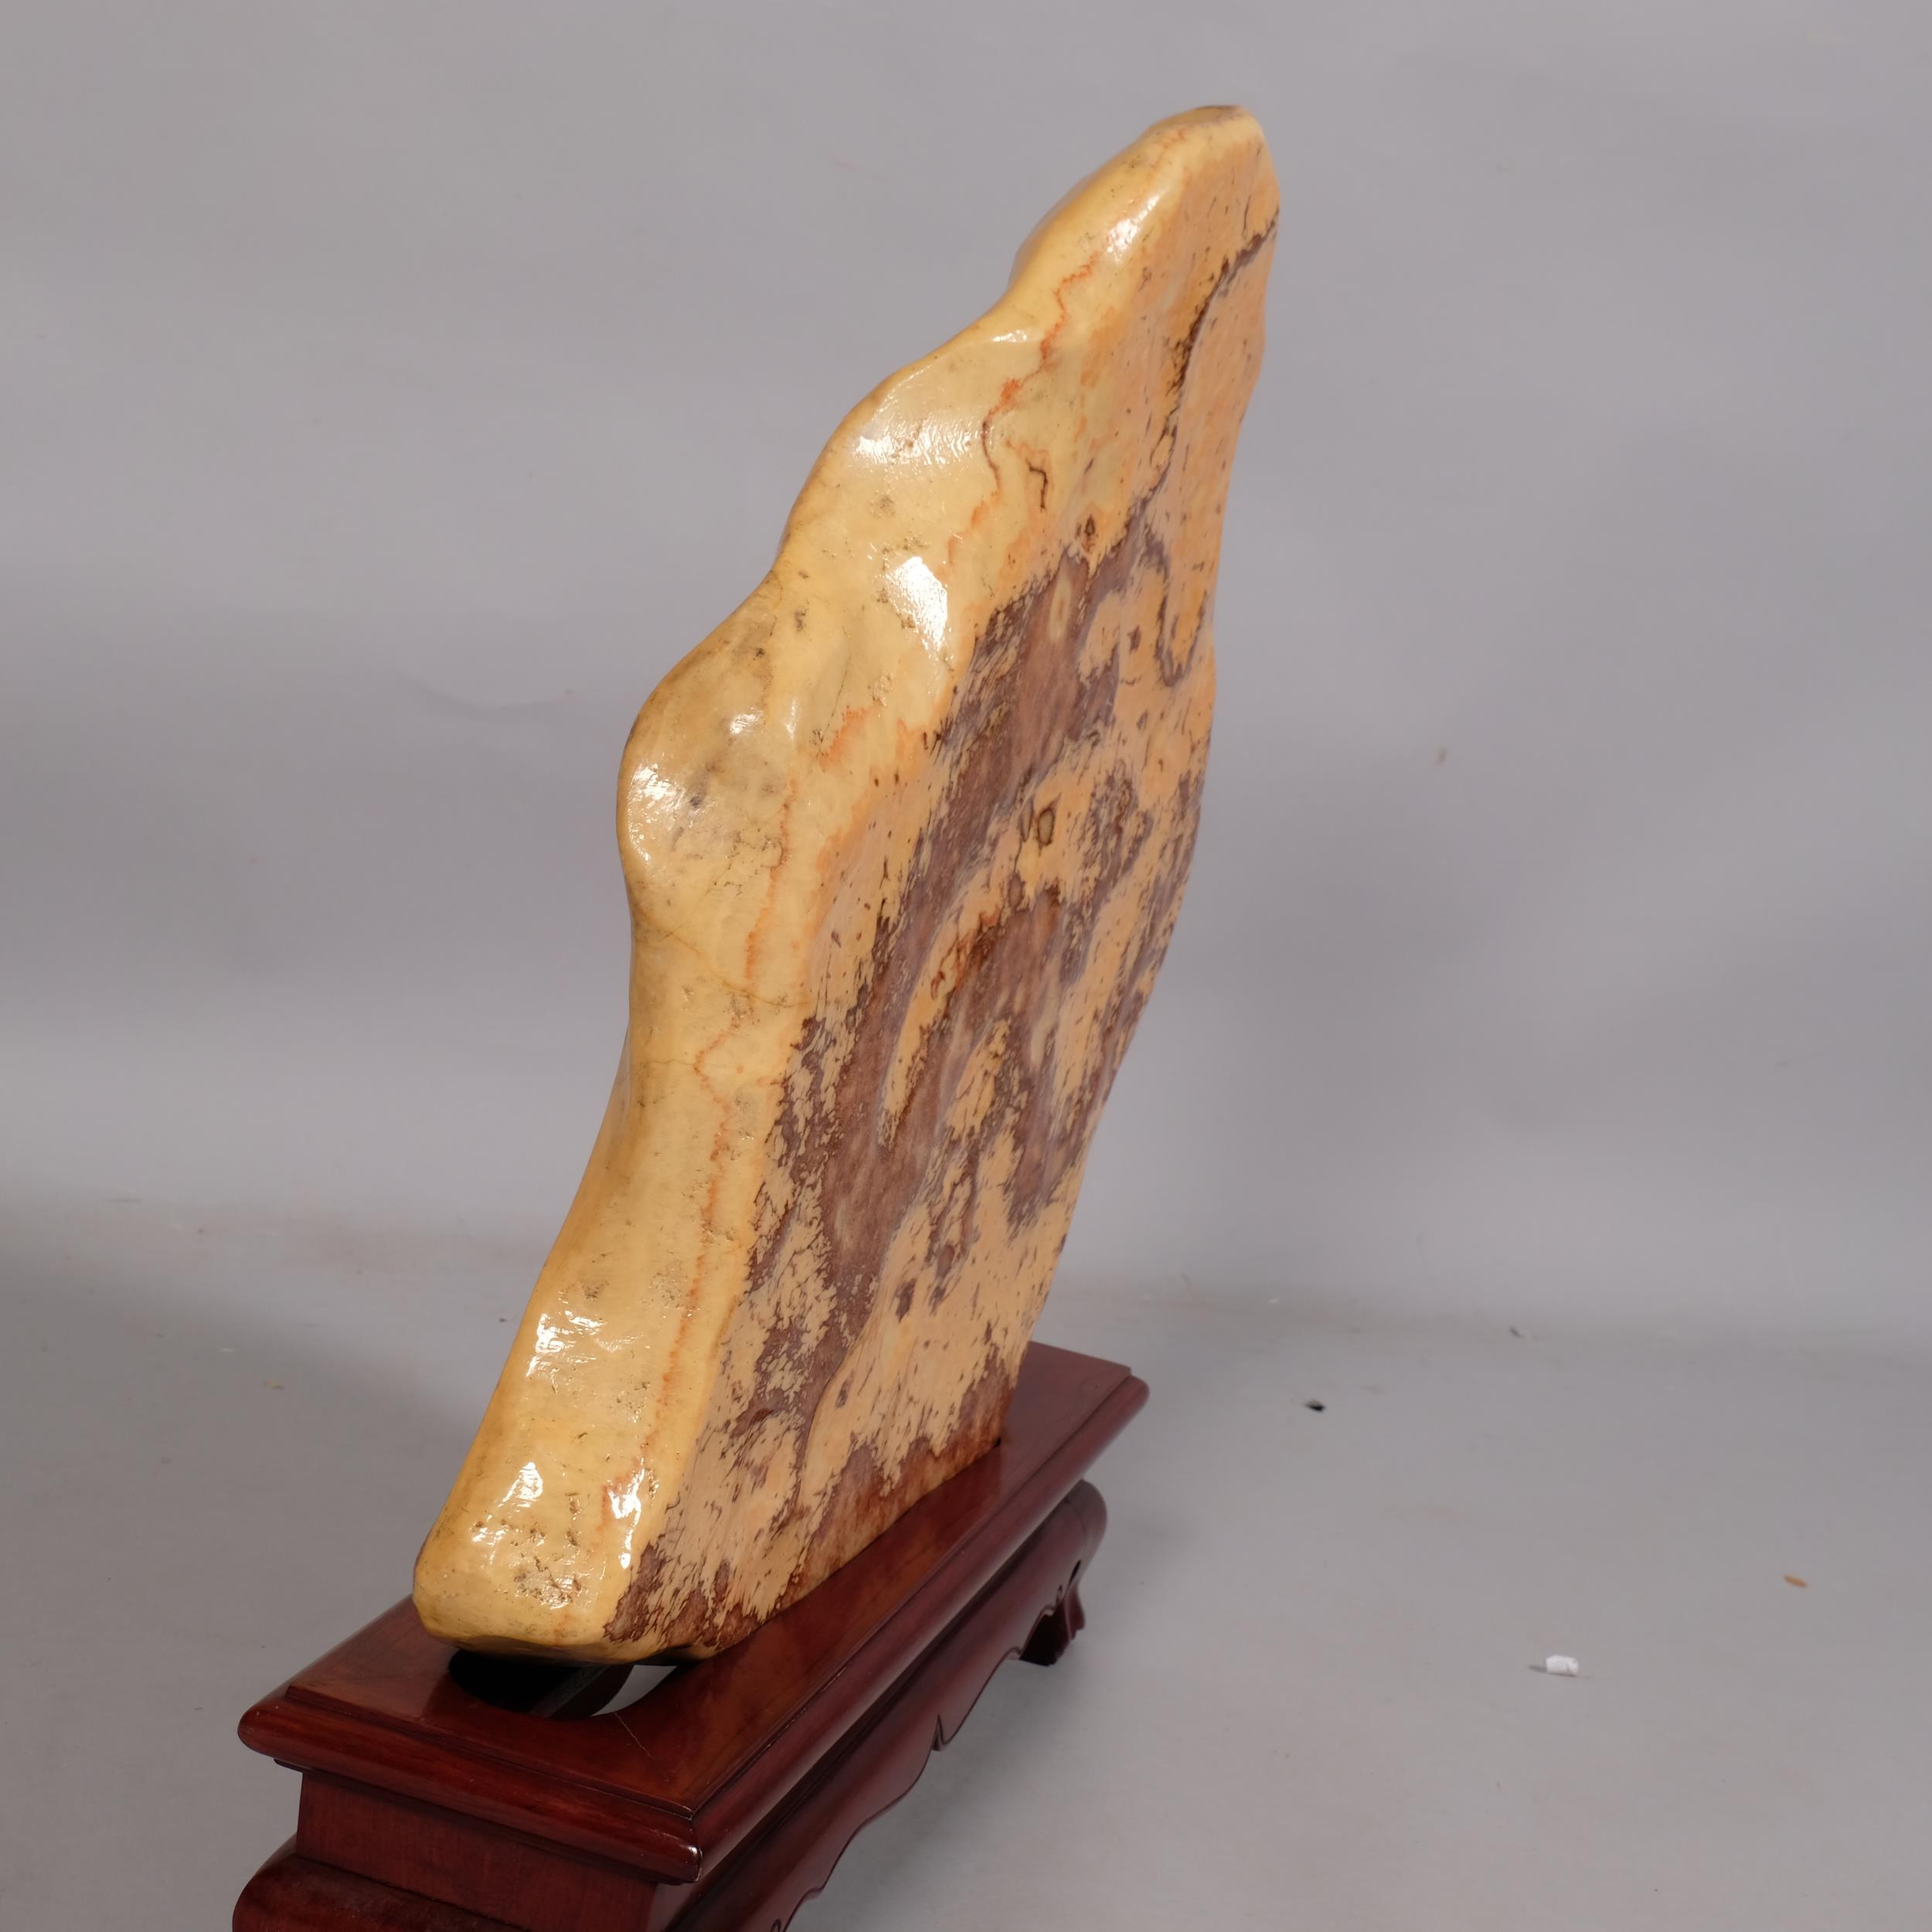 Abstract marble/stone sculpture depicting a tiger, on hardwood stand, overall height 55cm - Image 4 of 4